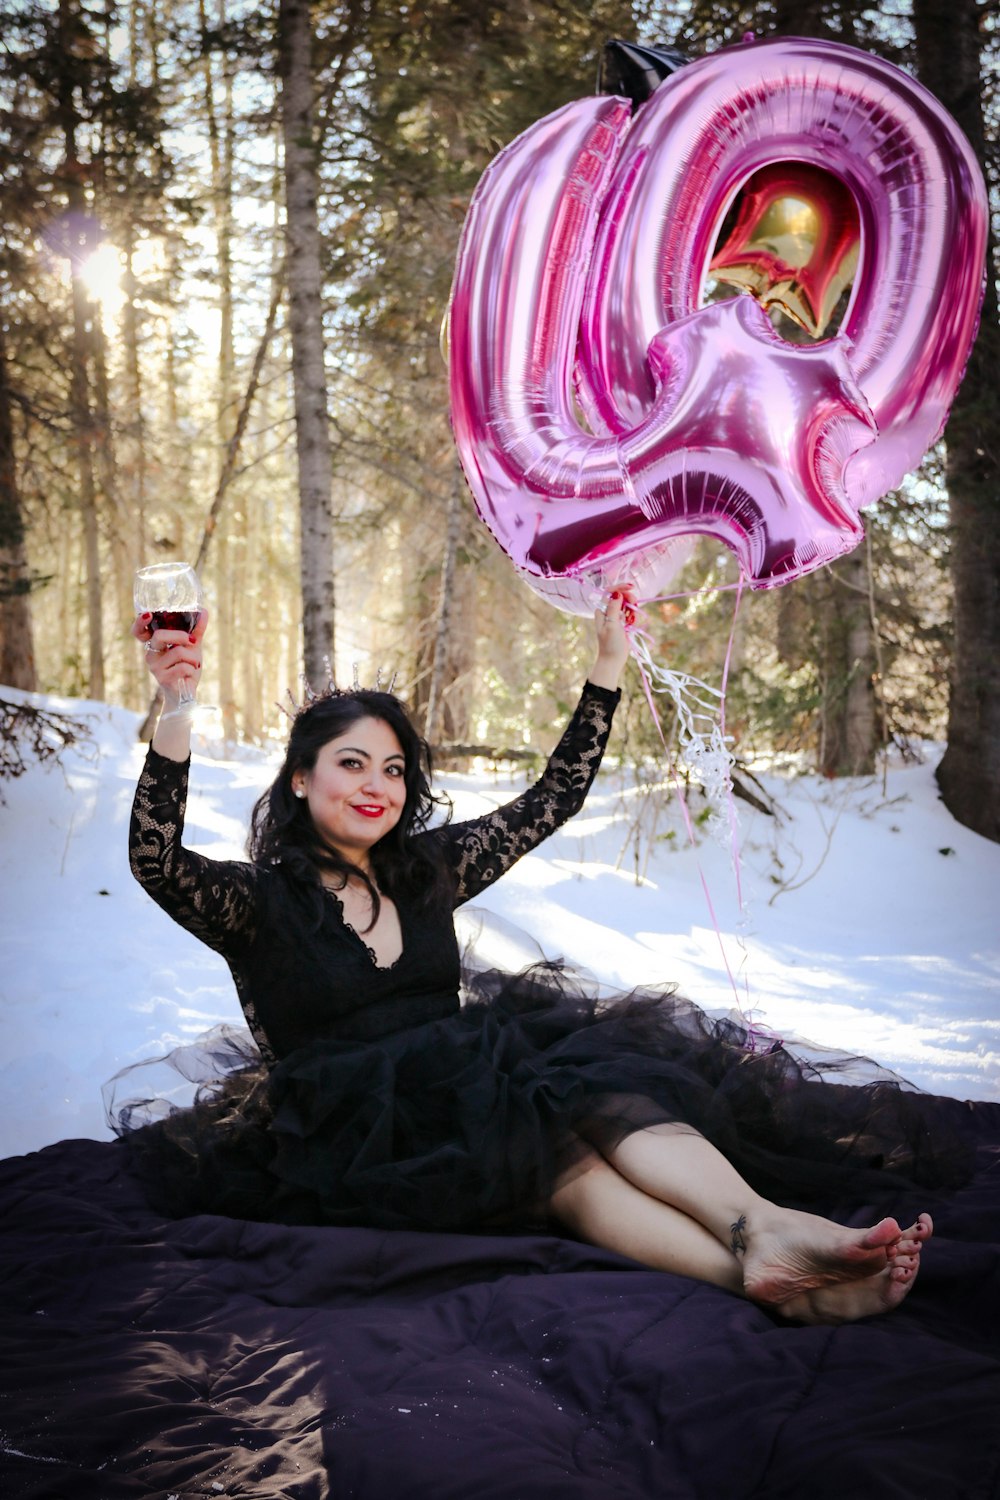 a person in a black dress holding a pink balloon in the snow